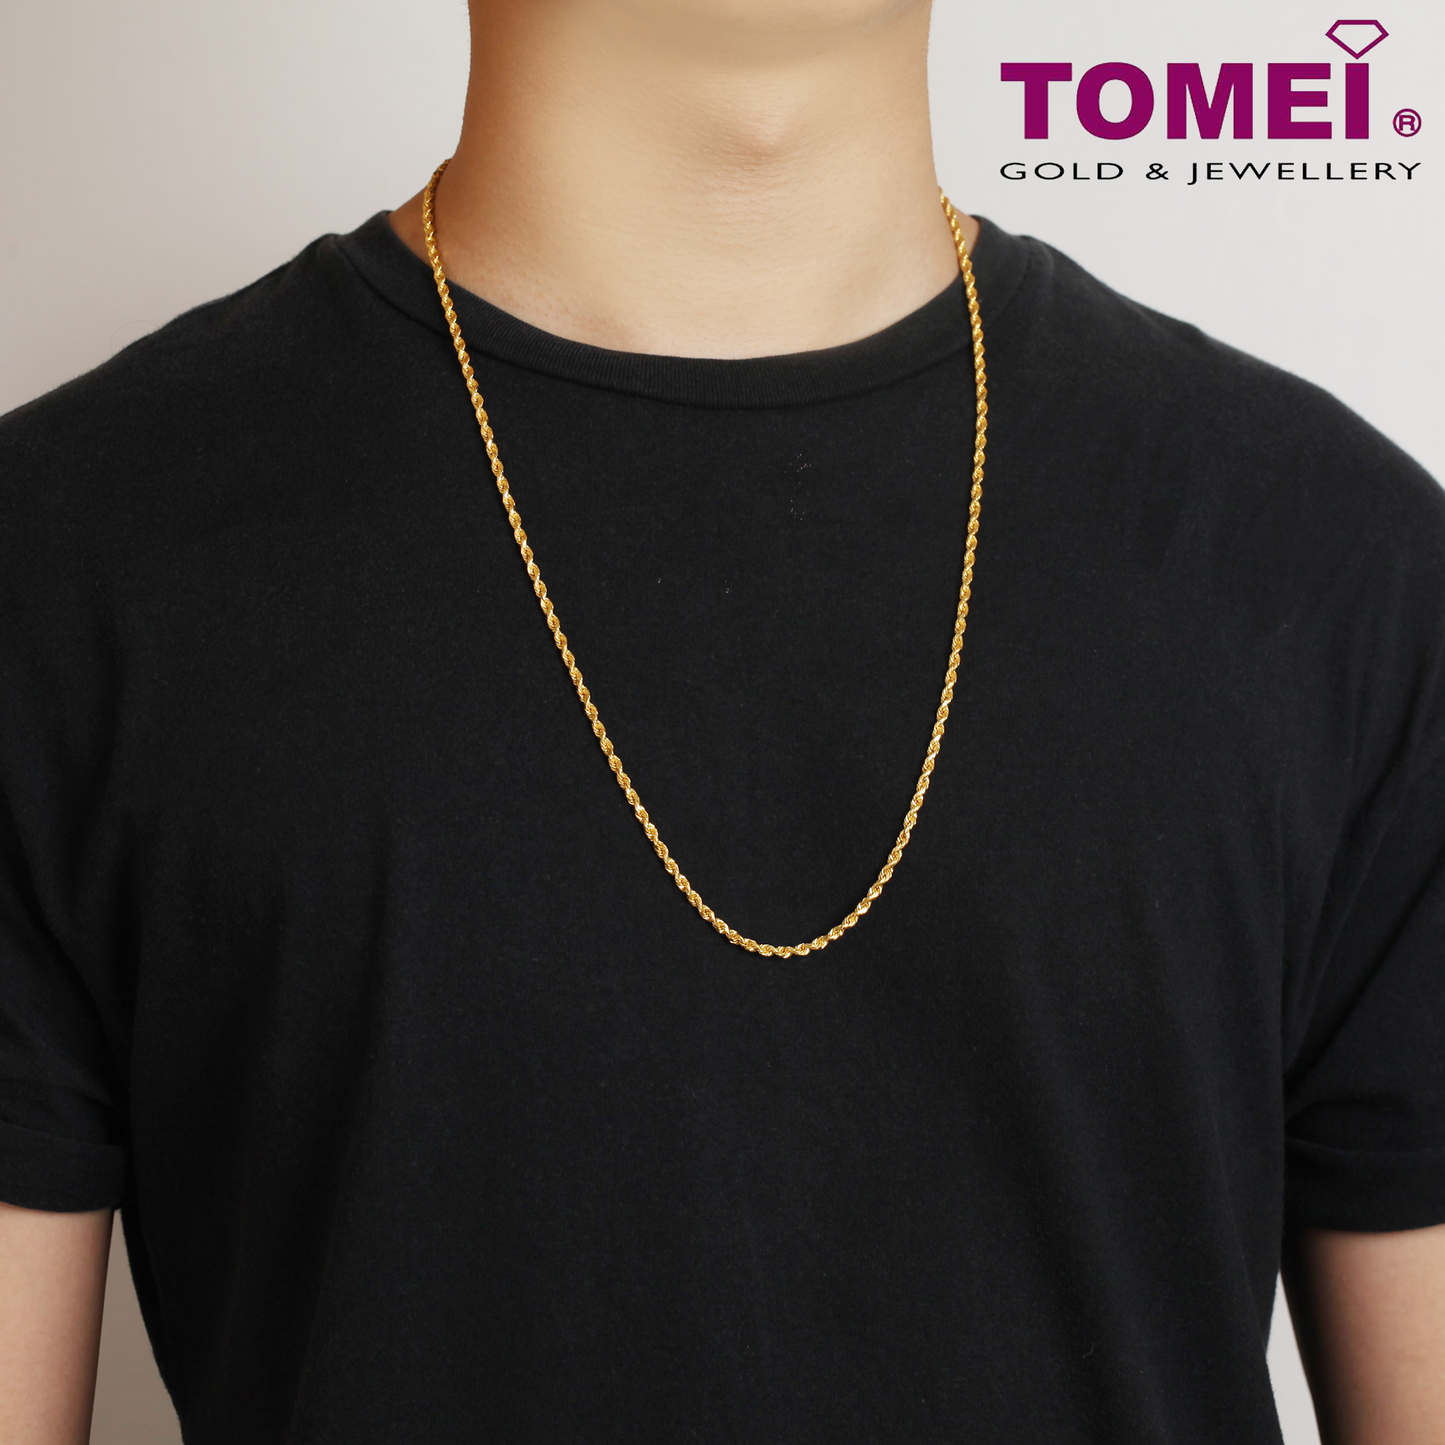 TOMEI Men's Twisted Singapore Chain, Yellow Gold 916